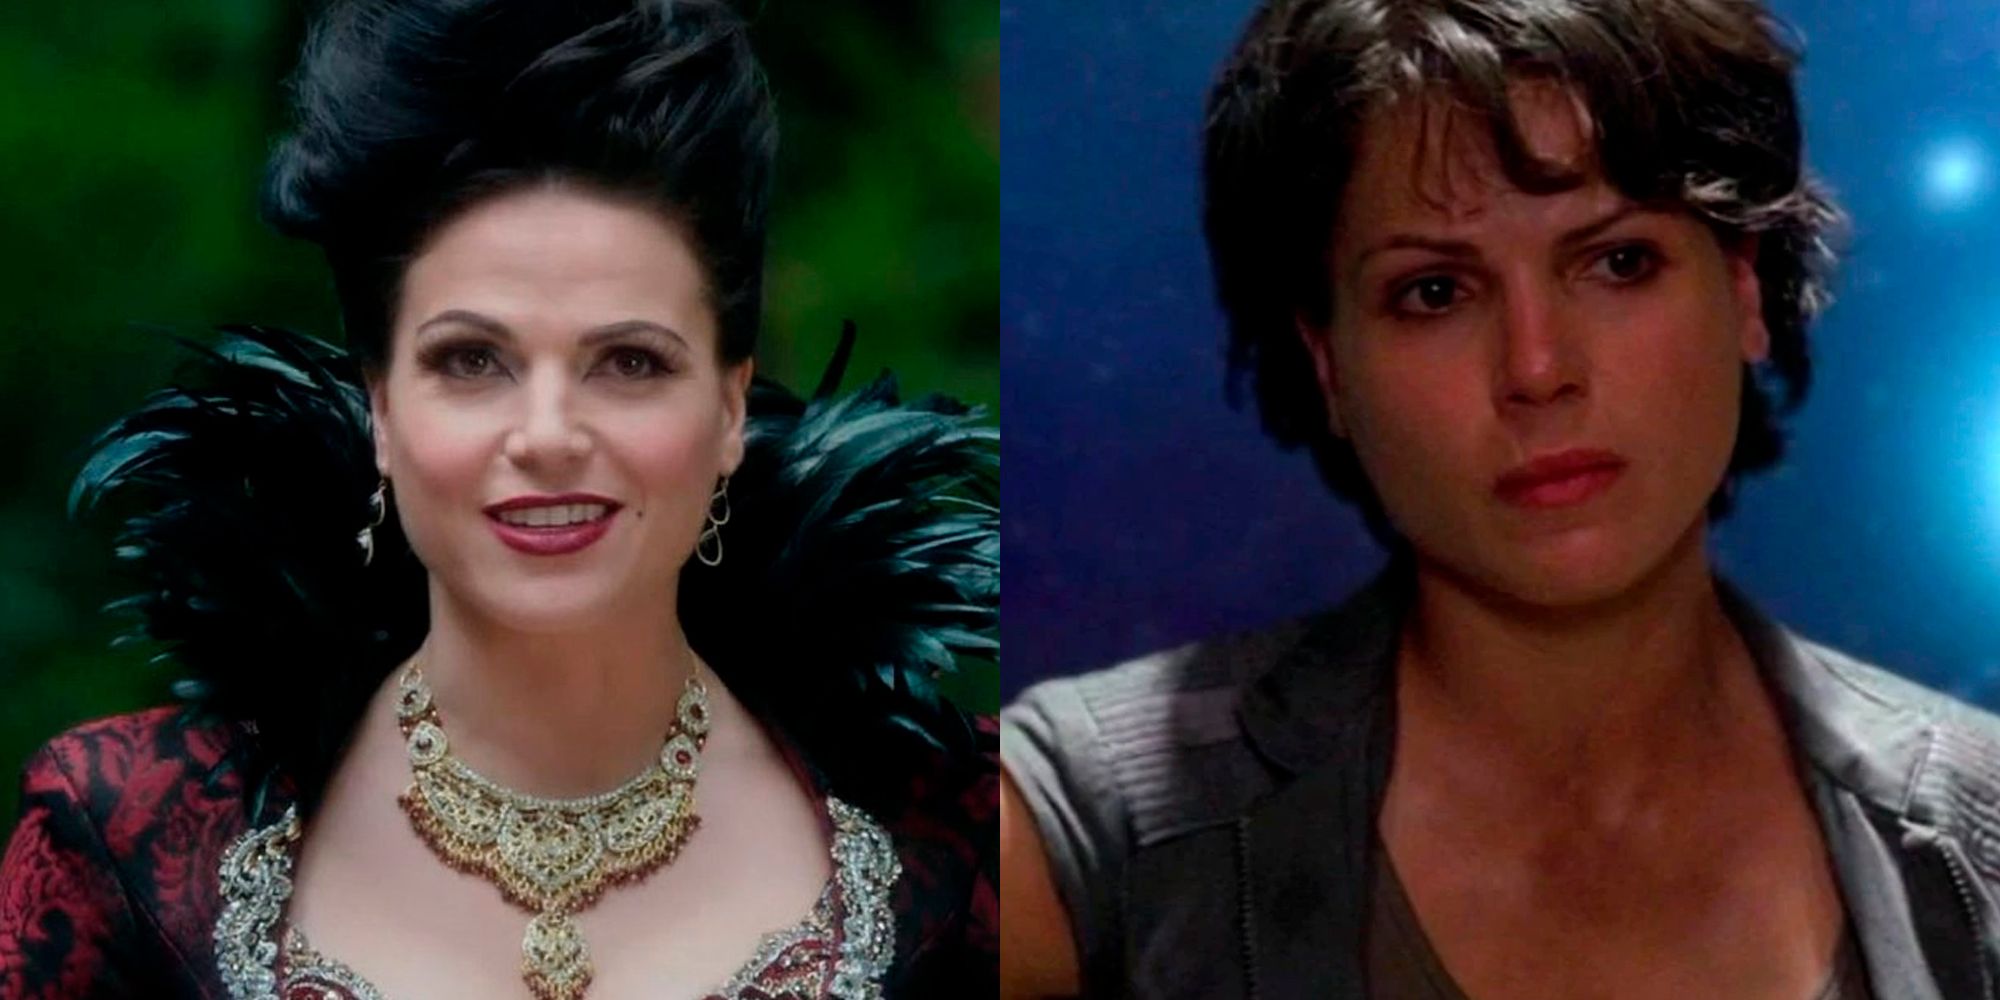 Lana Parrilla plays the Evil Queen Regina Mills and Greta in Once Upon a Time and Lost